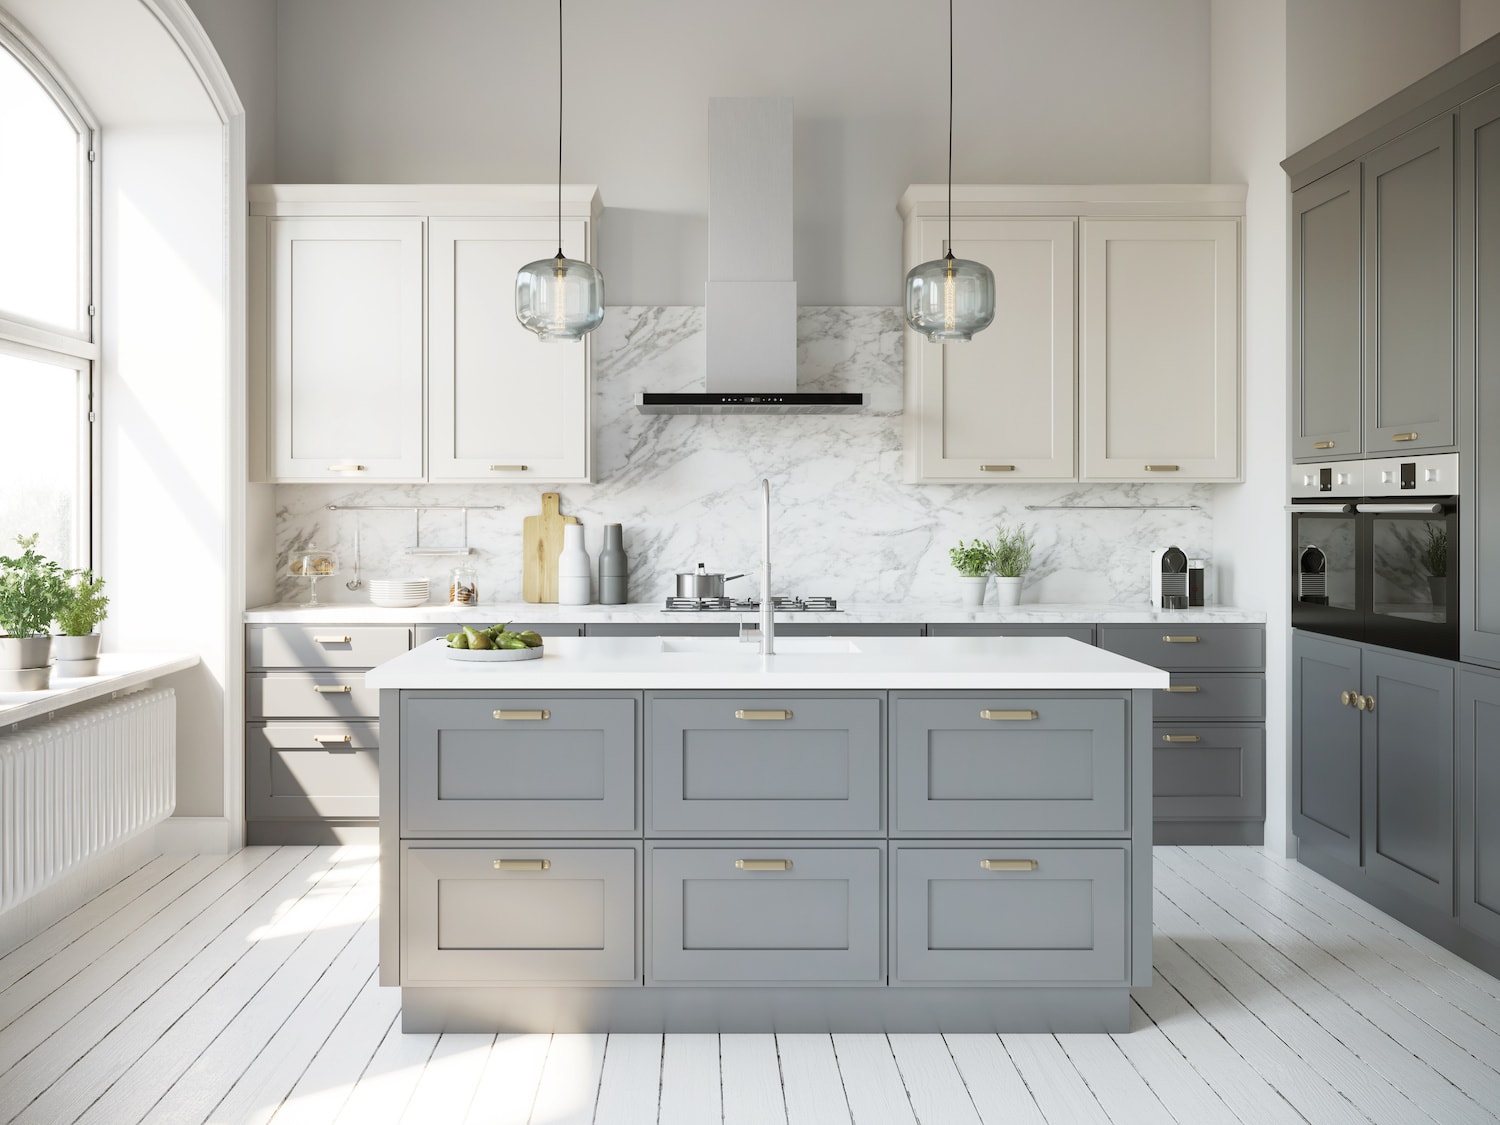 A kitchen with grimes grey and white cabinets and a white island.